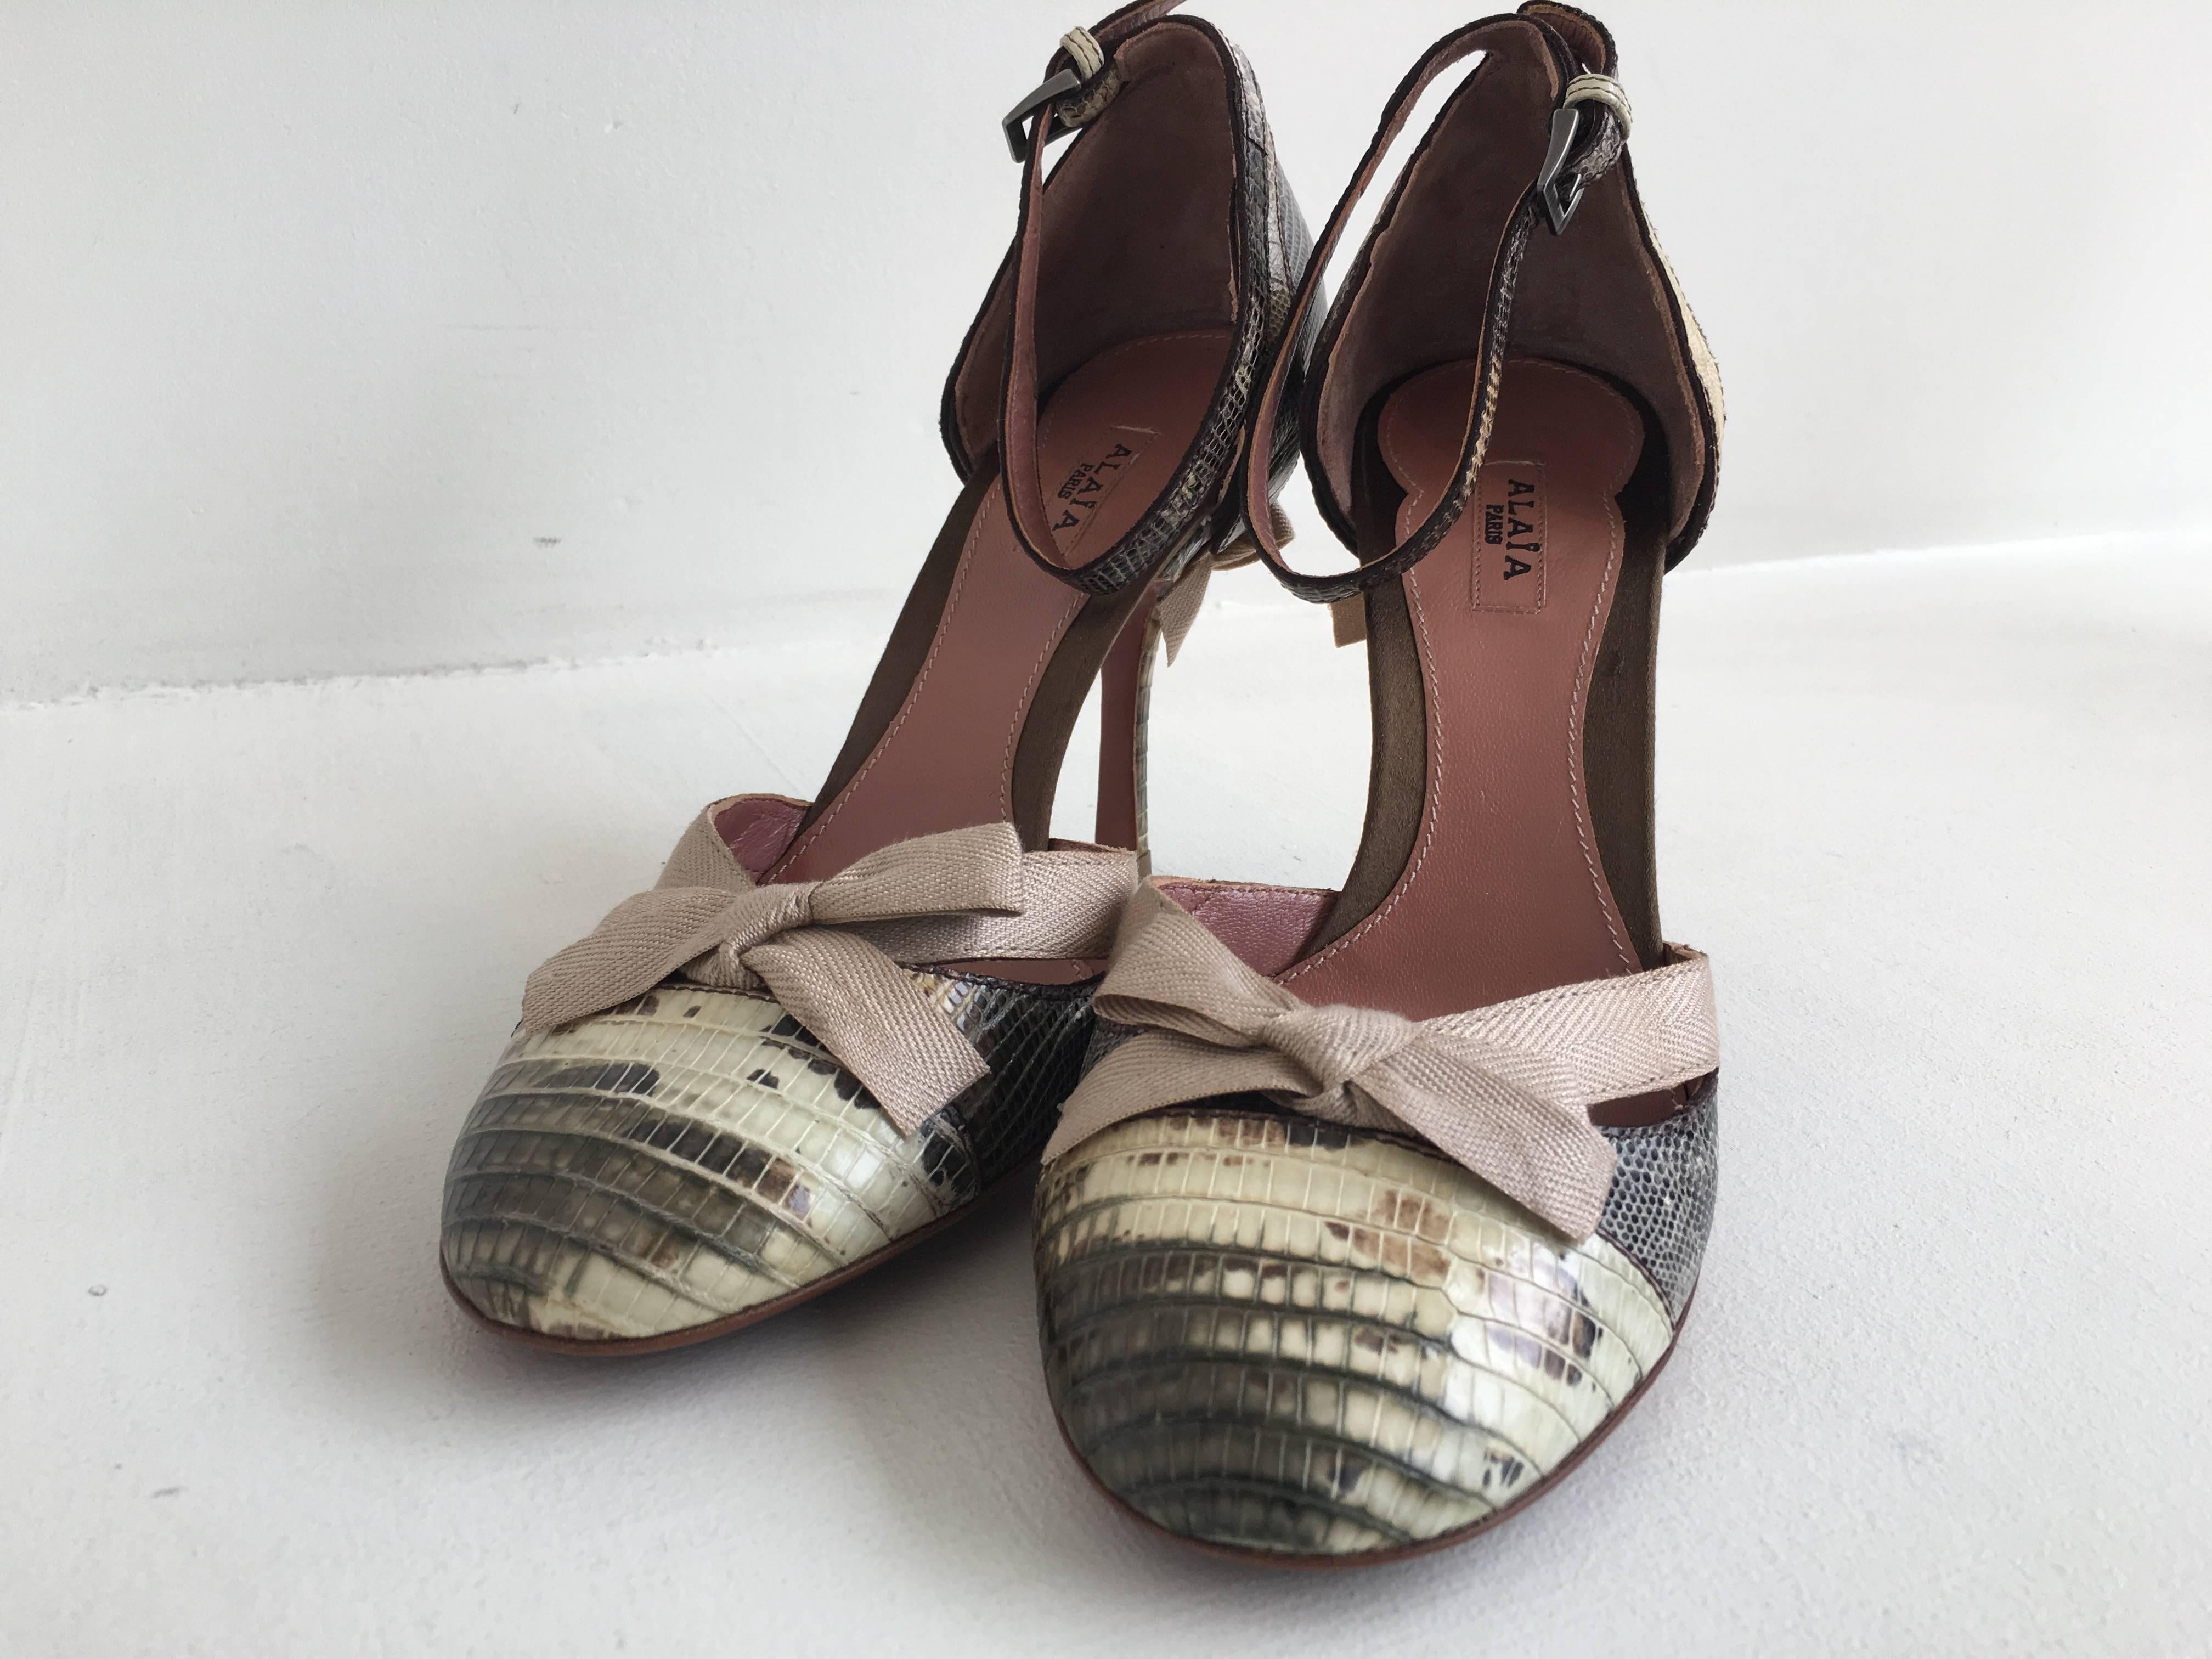 Gray Alaia Lizard d'Orsay Heel (36.5) with bow detail on heel For Sale